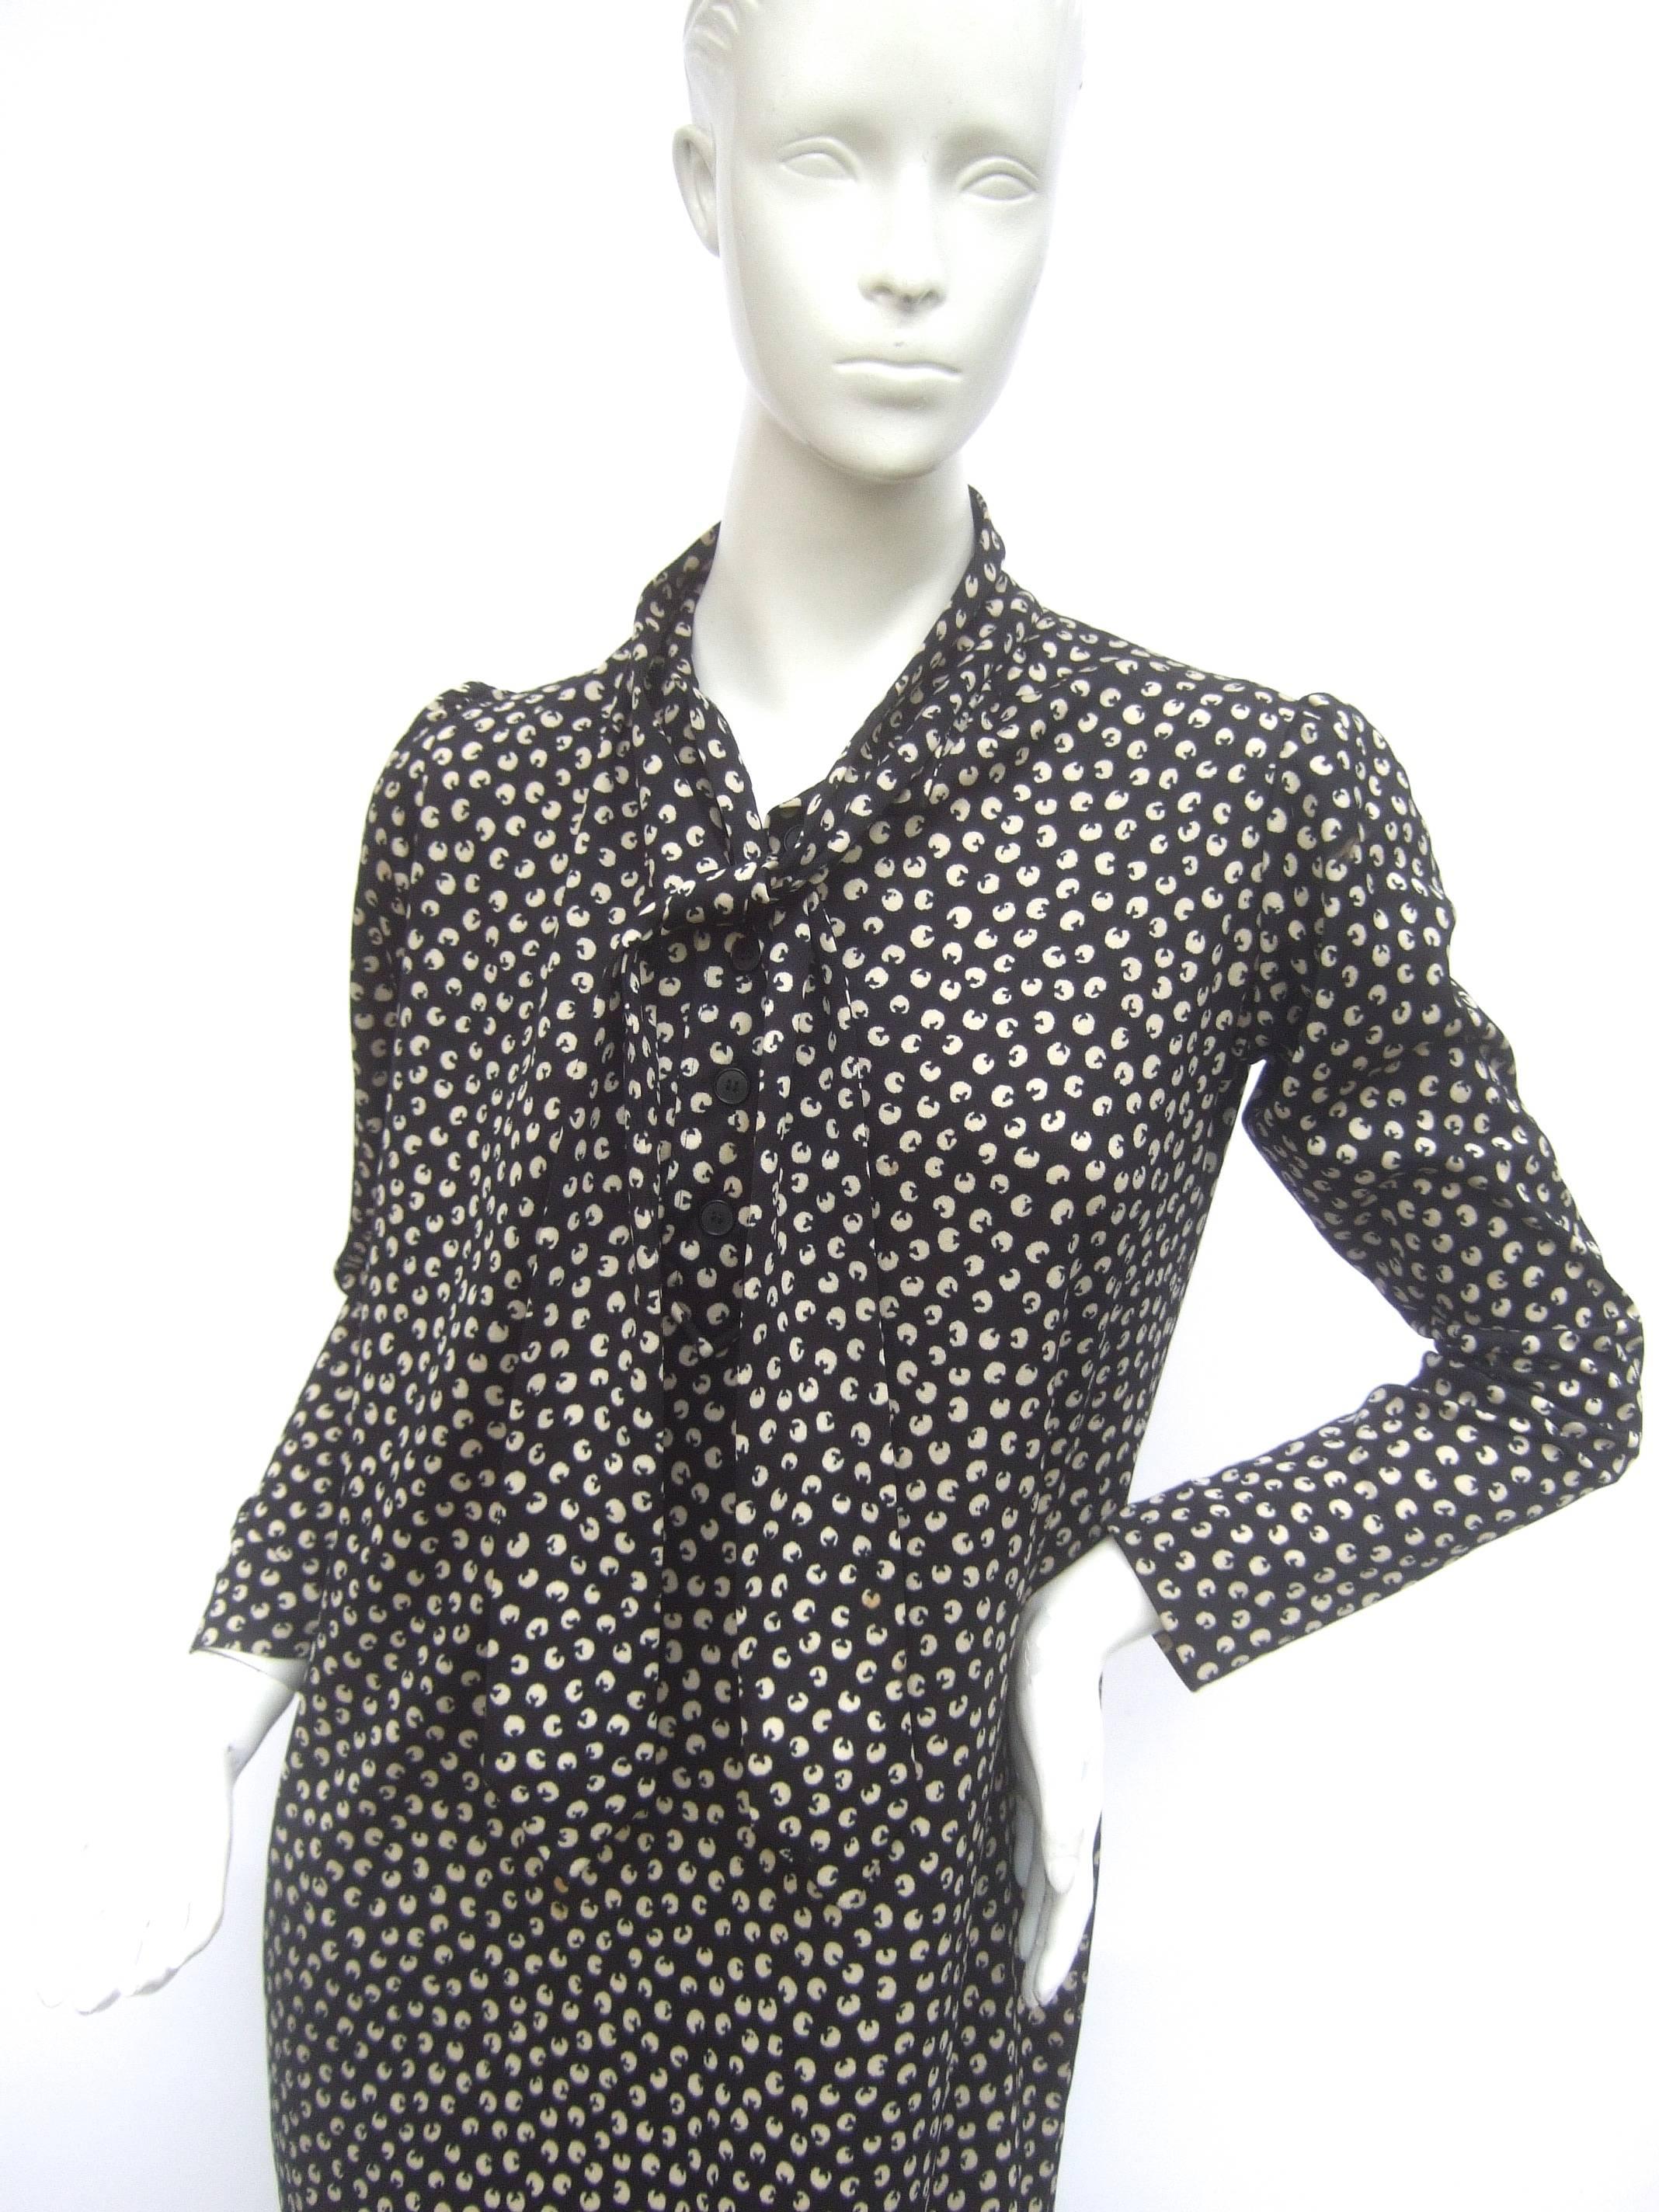 Saint Laurent rive gauche chic black and white print shirt dress c 1970s
The stylish poly knit print dress is designed with a stationary 
tie around the neck. It can be knotted into a bow or worn 
loose around the shoulders. The shoulders have a